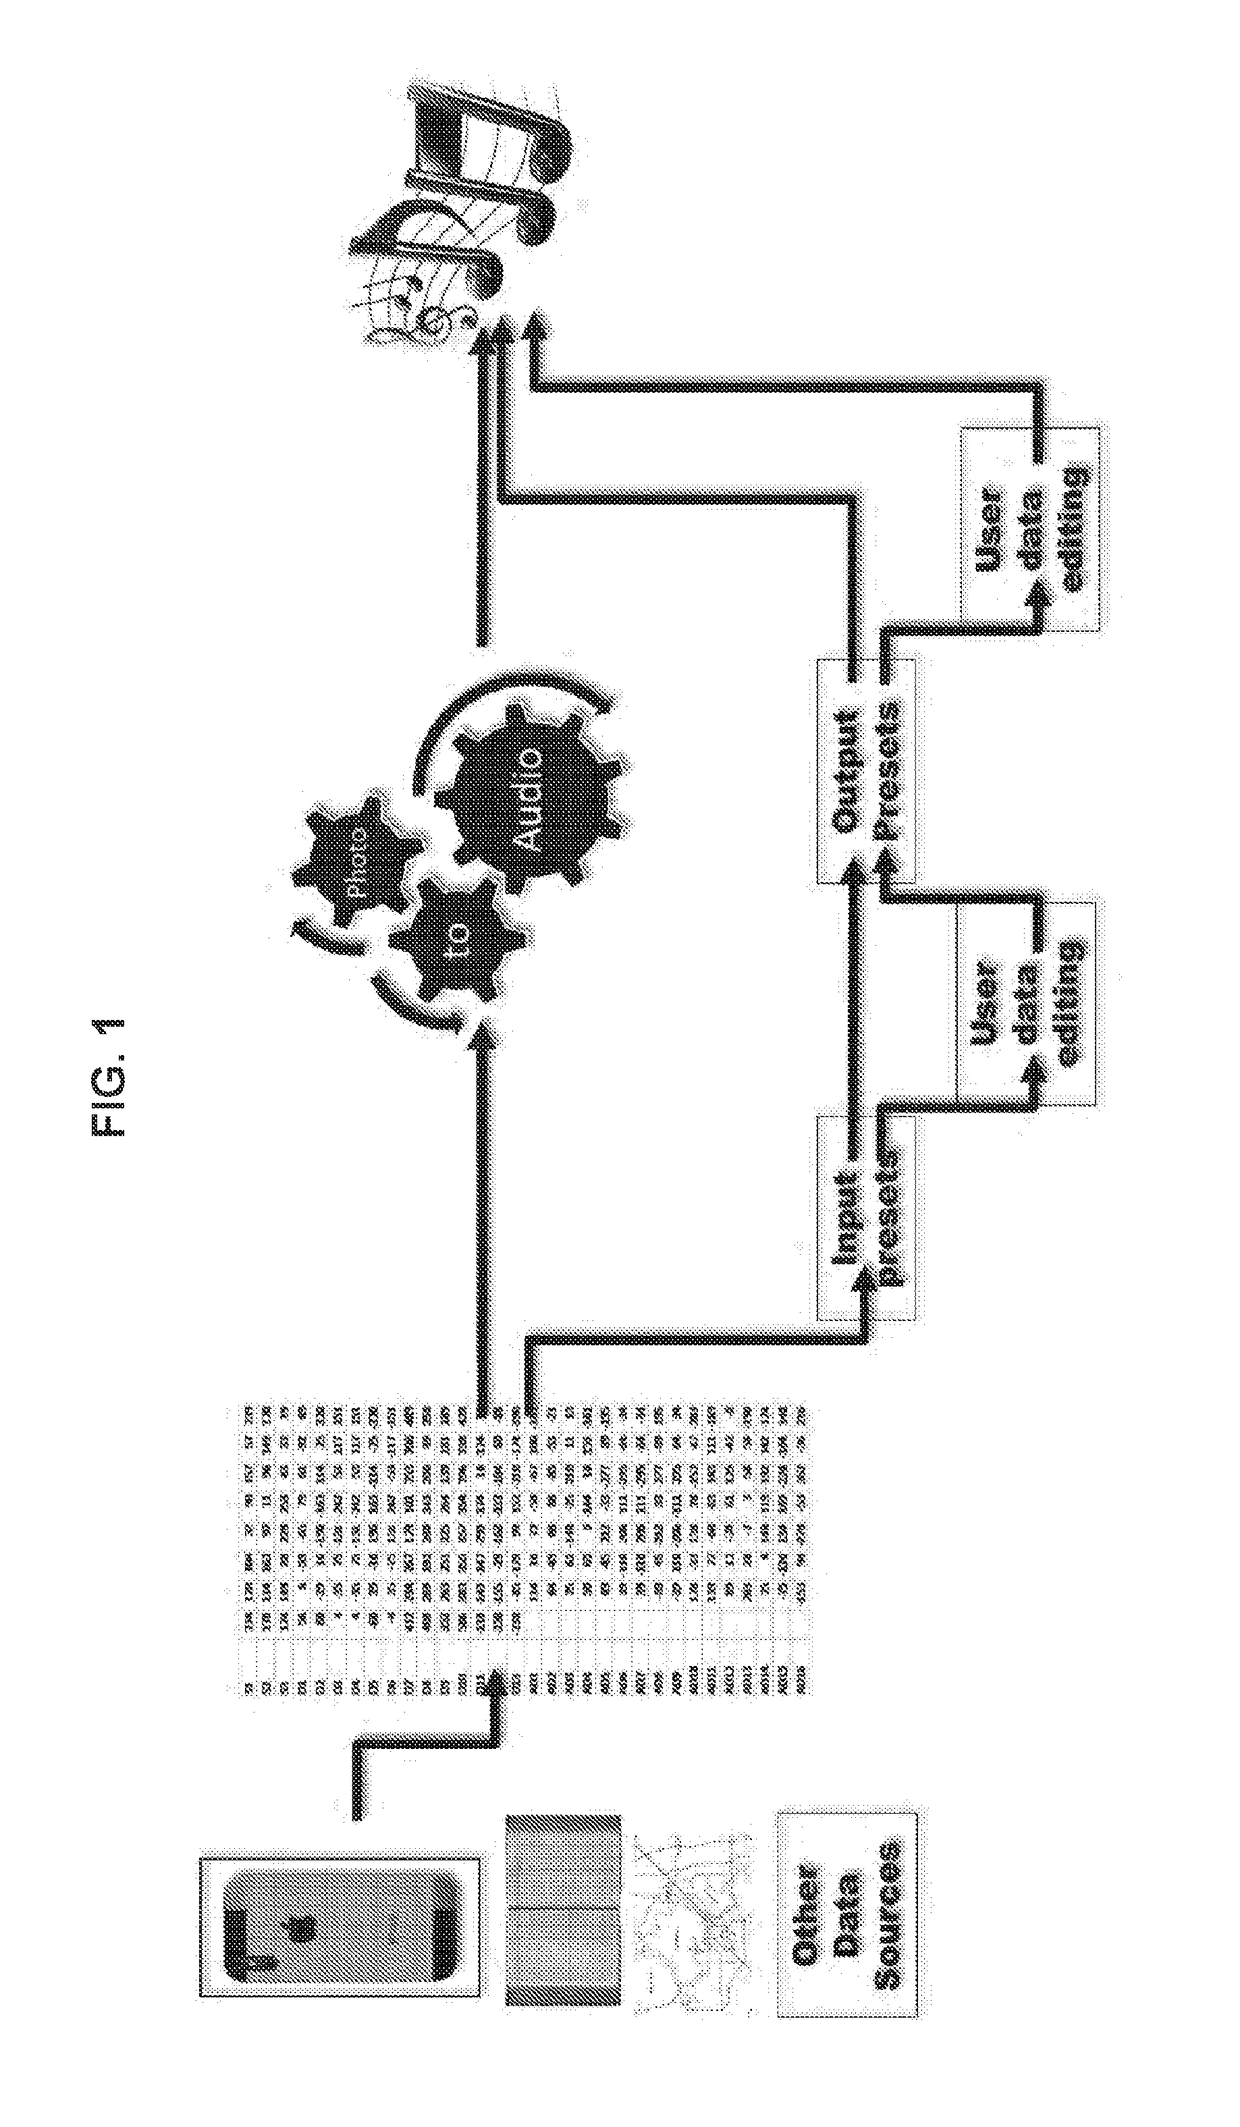 Systems and methods for visual image audio composition based on user input